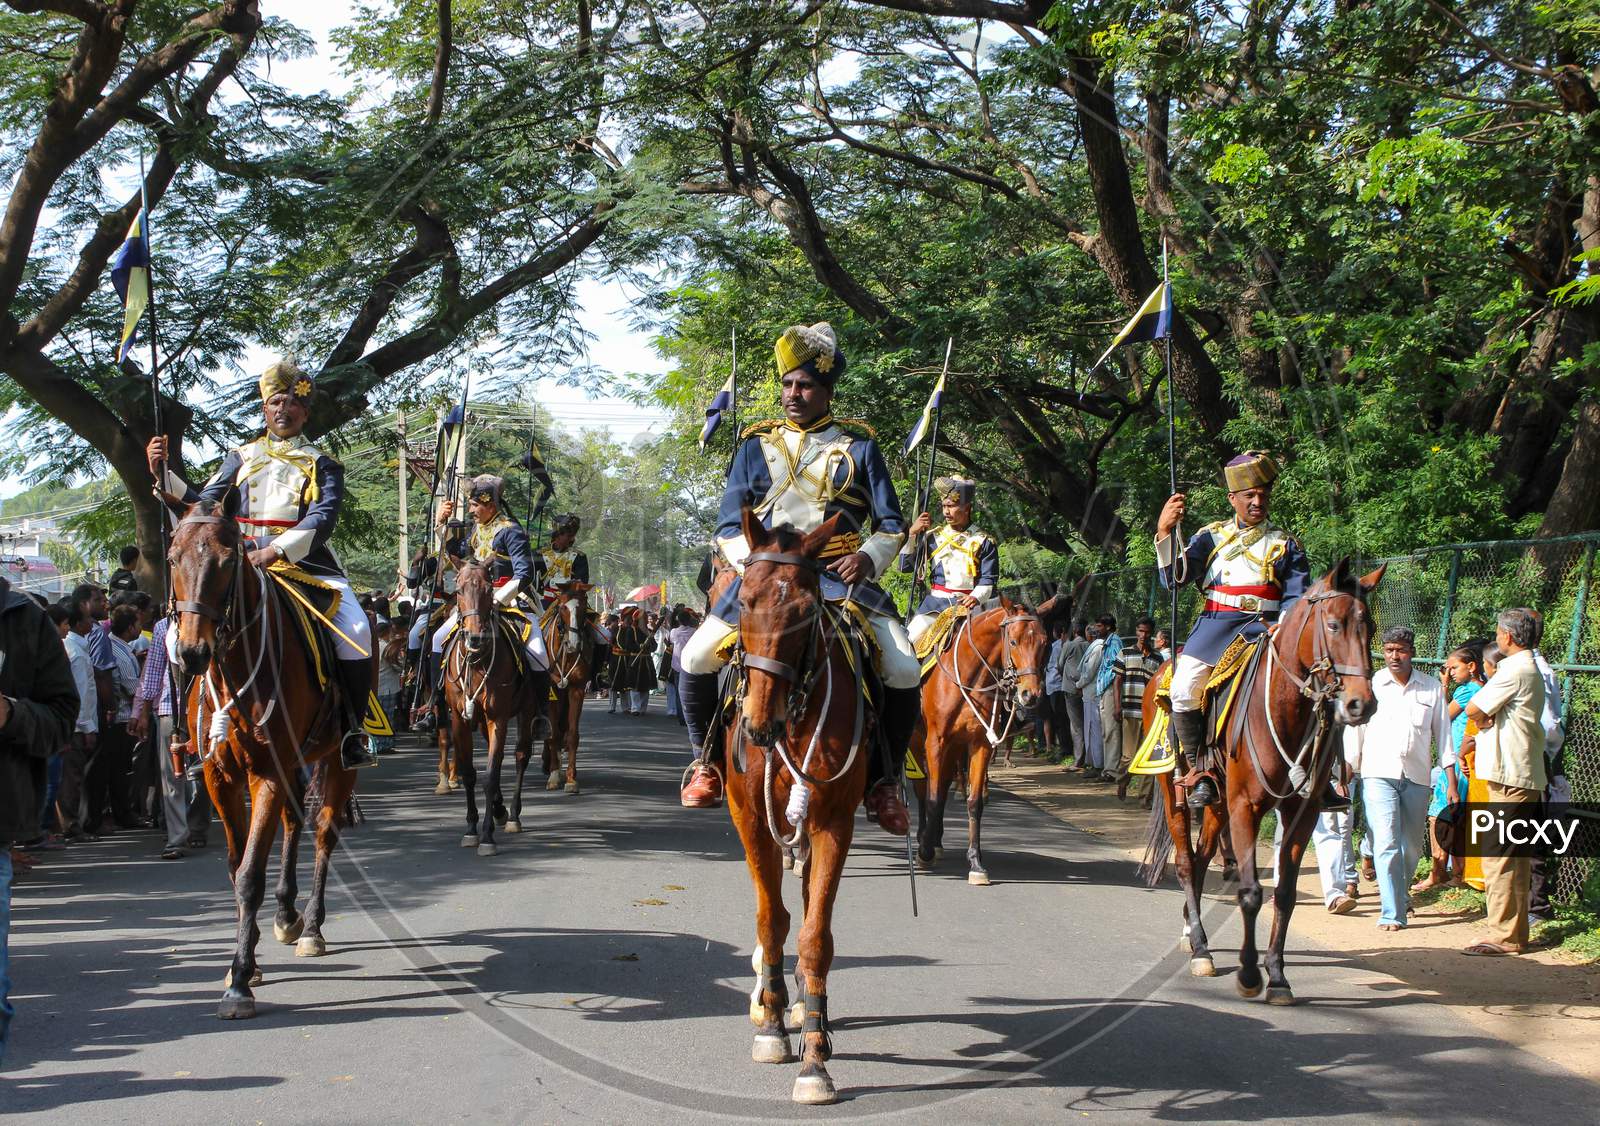 A Classic Picture of Royal Horsemen on a Procession with their Horses during a Religious ritual at Mysuru Cityscape of Karnataka/India.